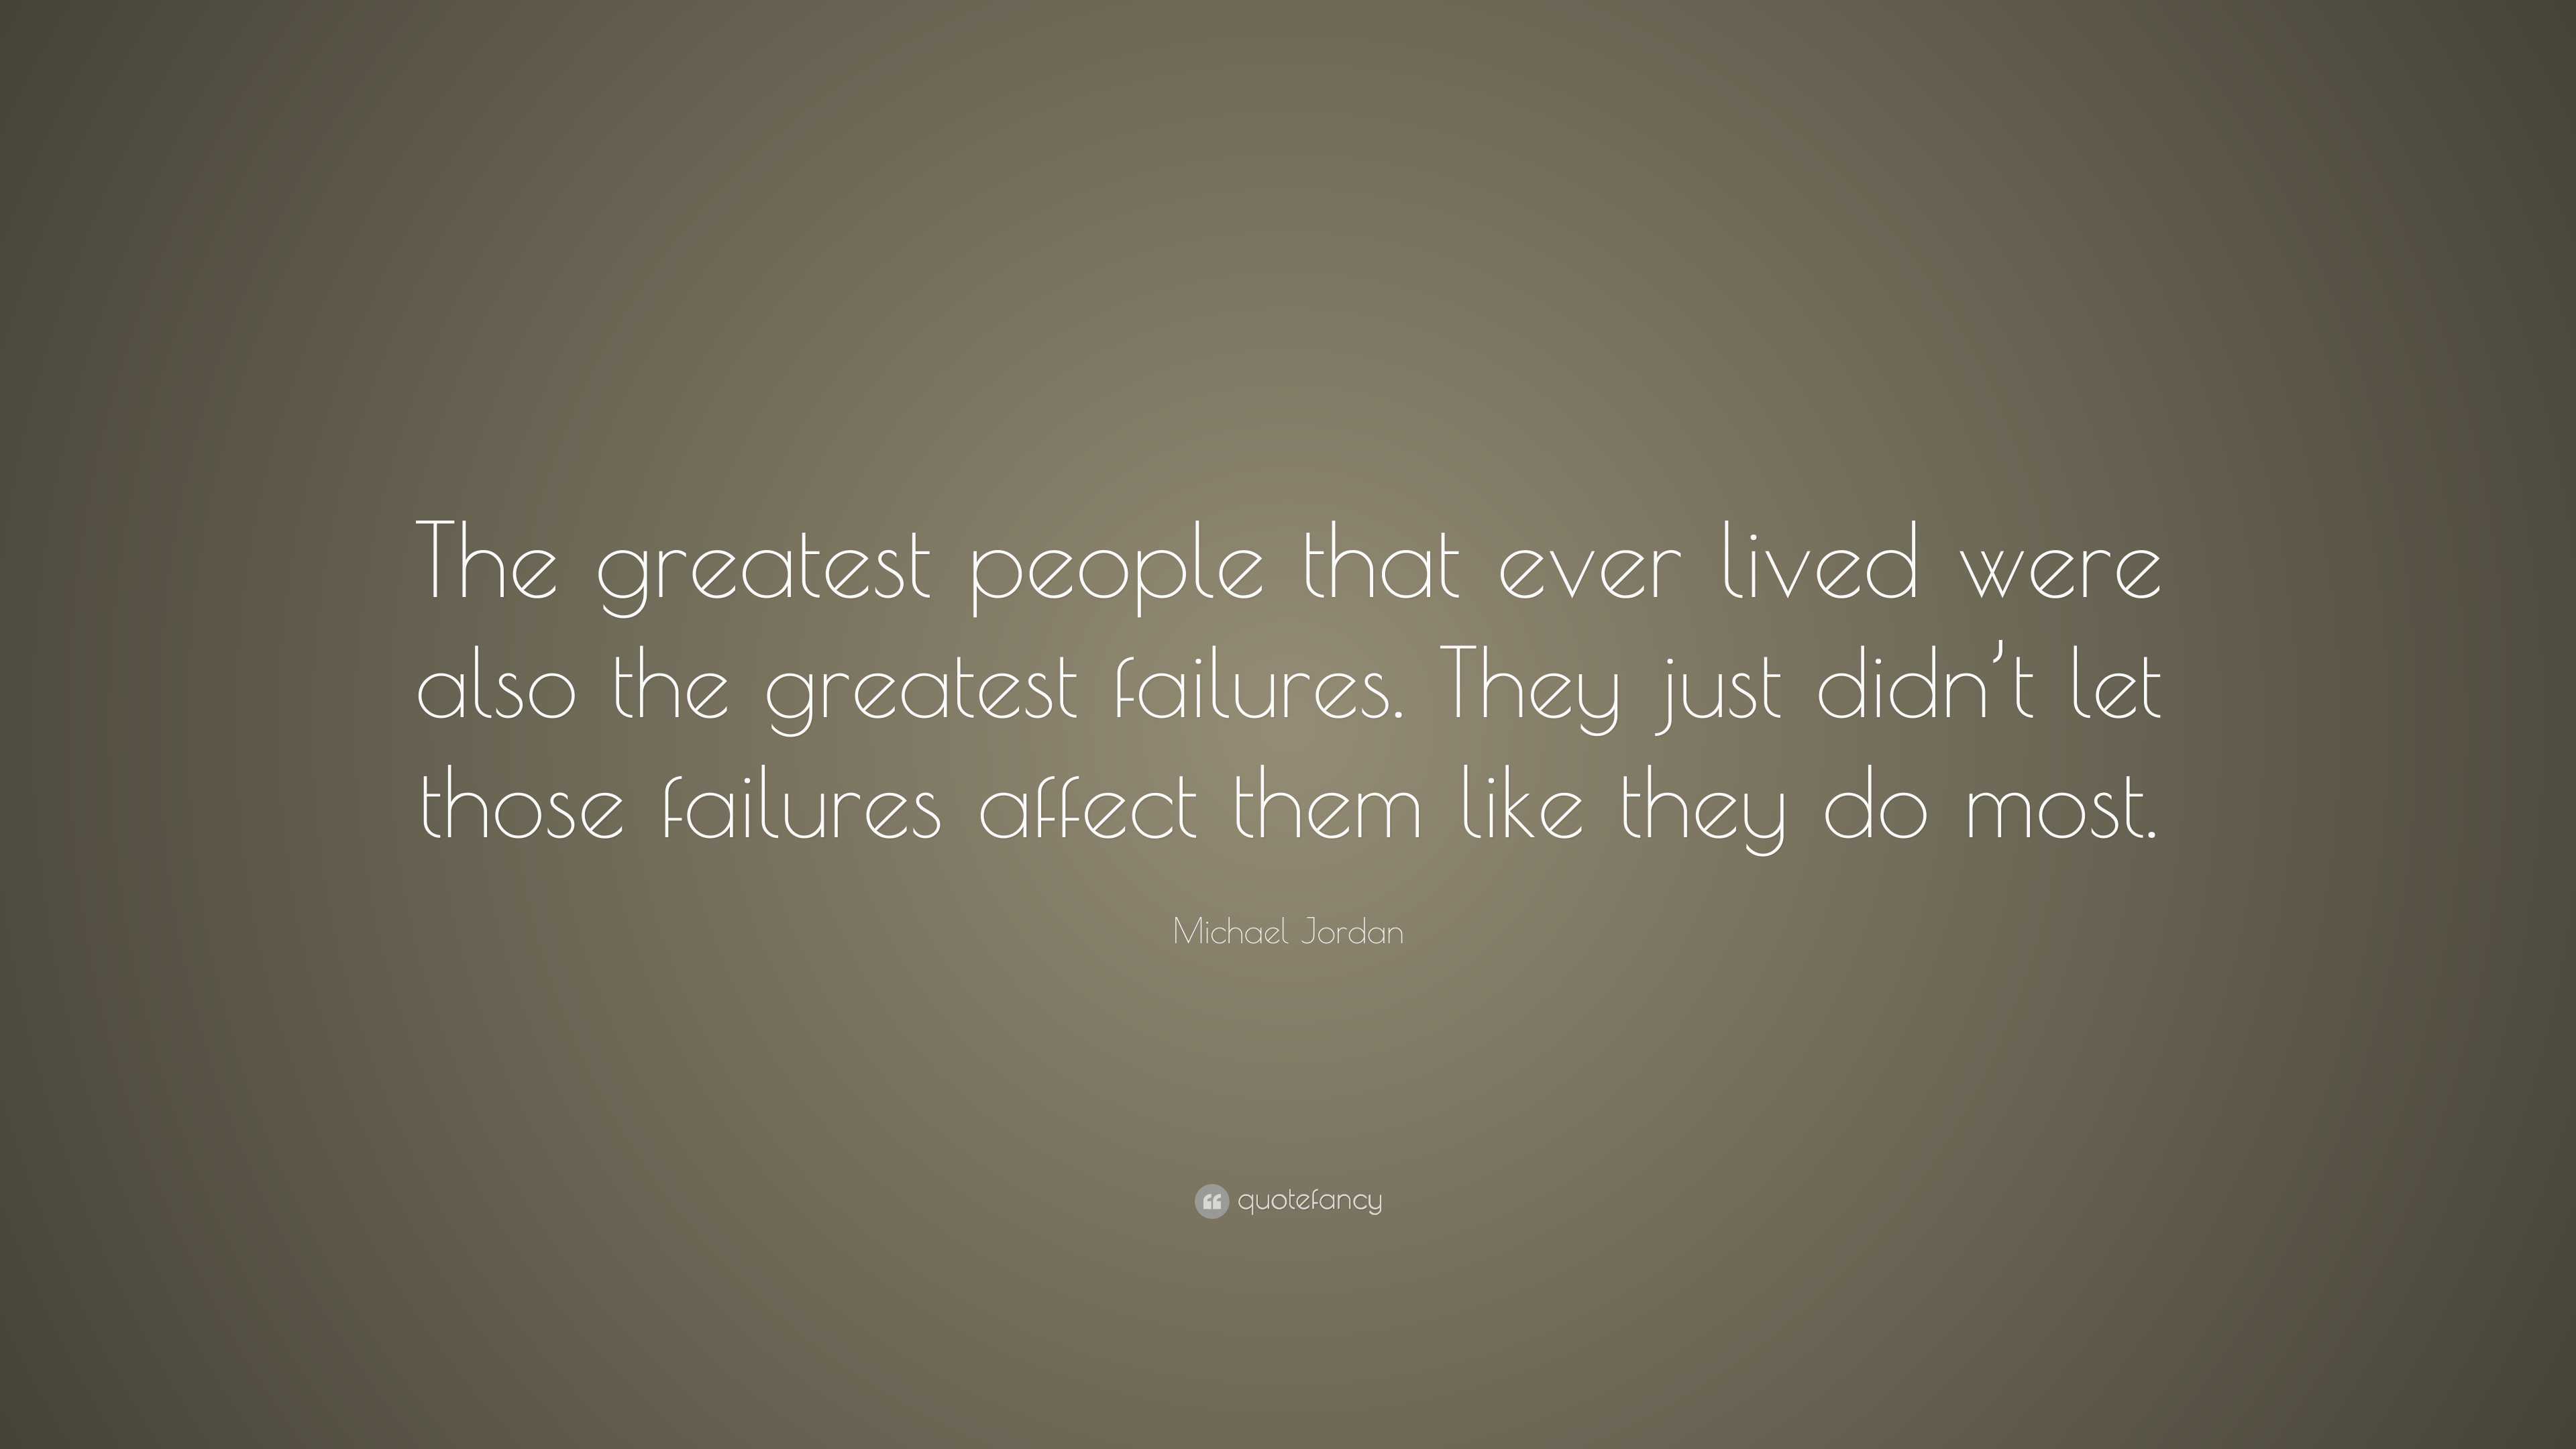 Michael Jordan Quote: “The greatest people that ever lived were also ...